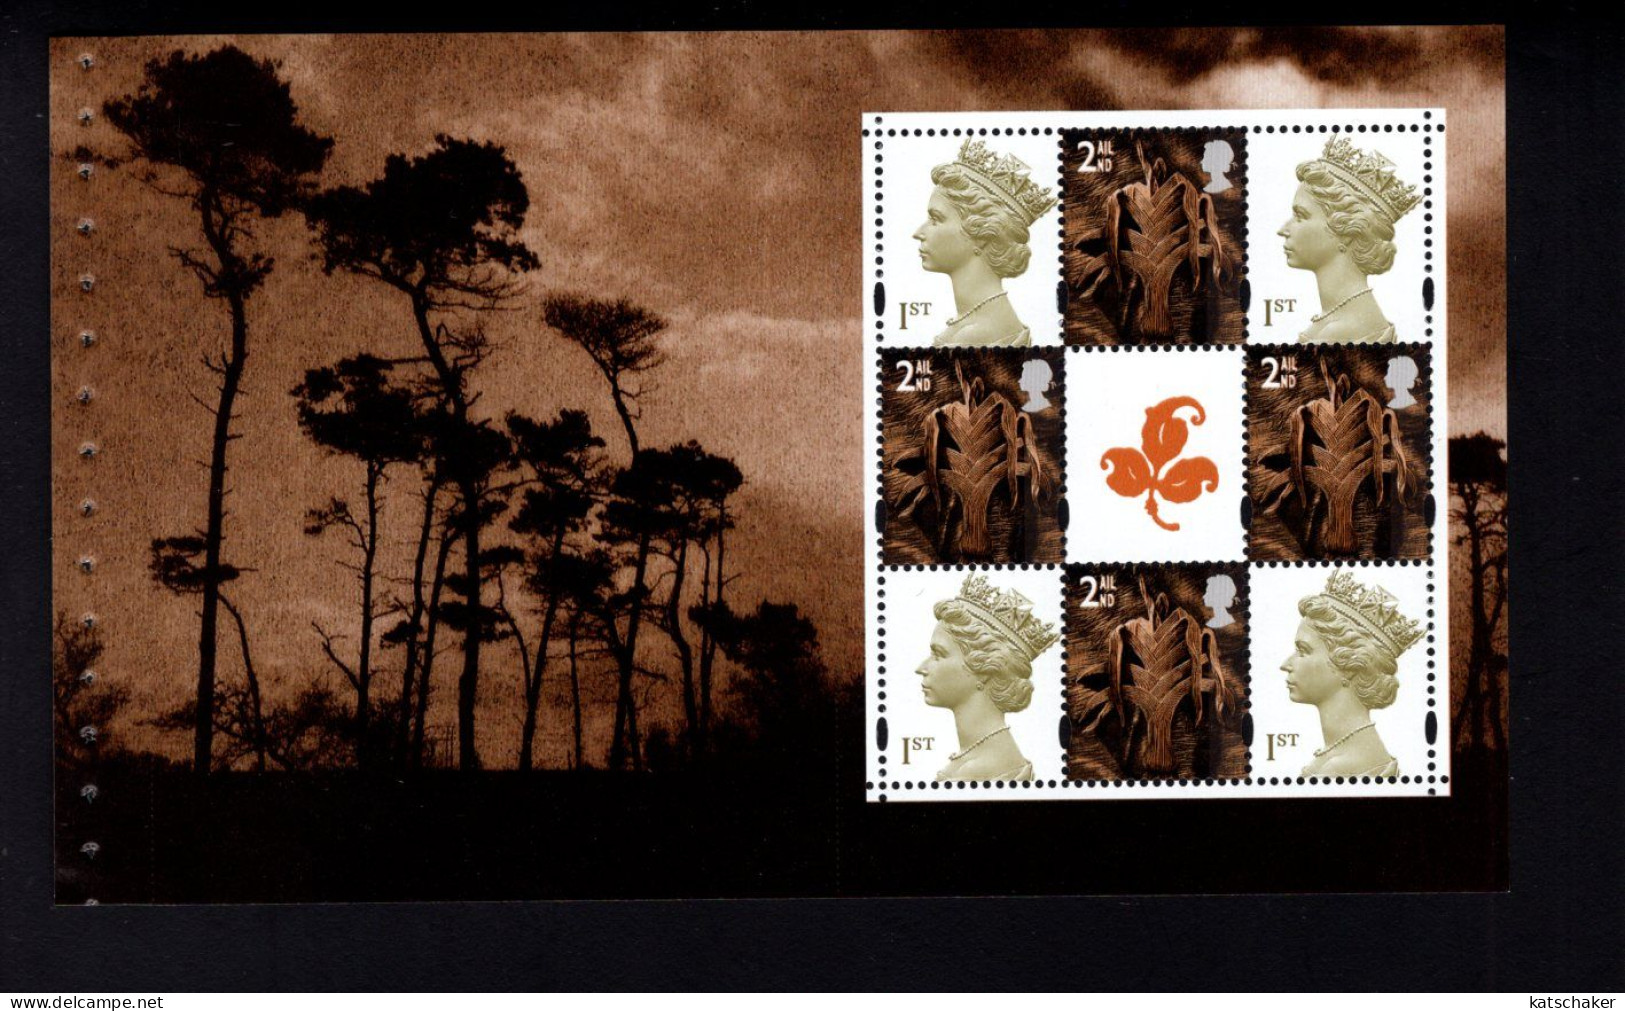 1919391885 2000 SCOTT 18A  (XX) POSTFRIS MINT NEVER HINGED  -   BOOKLET PANE  - TREES - Wales